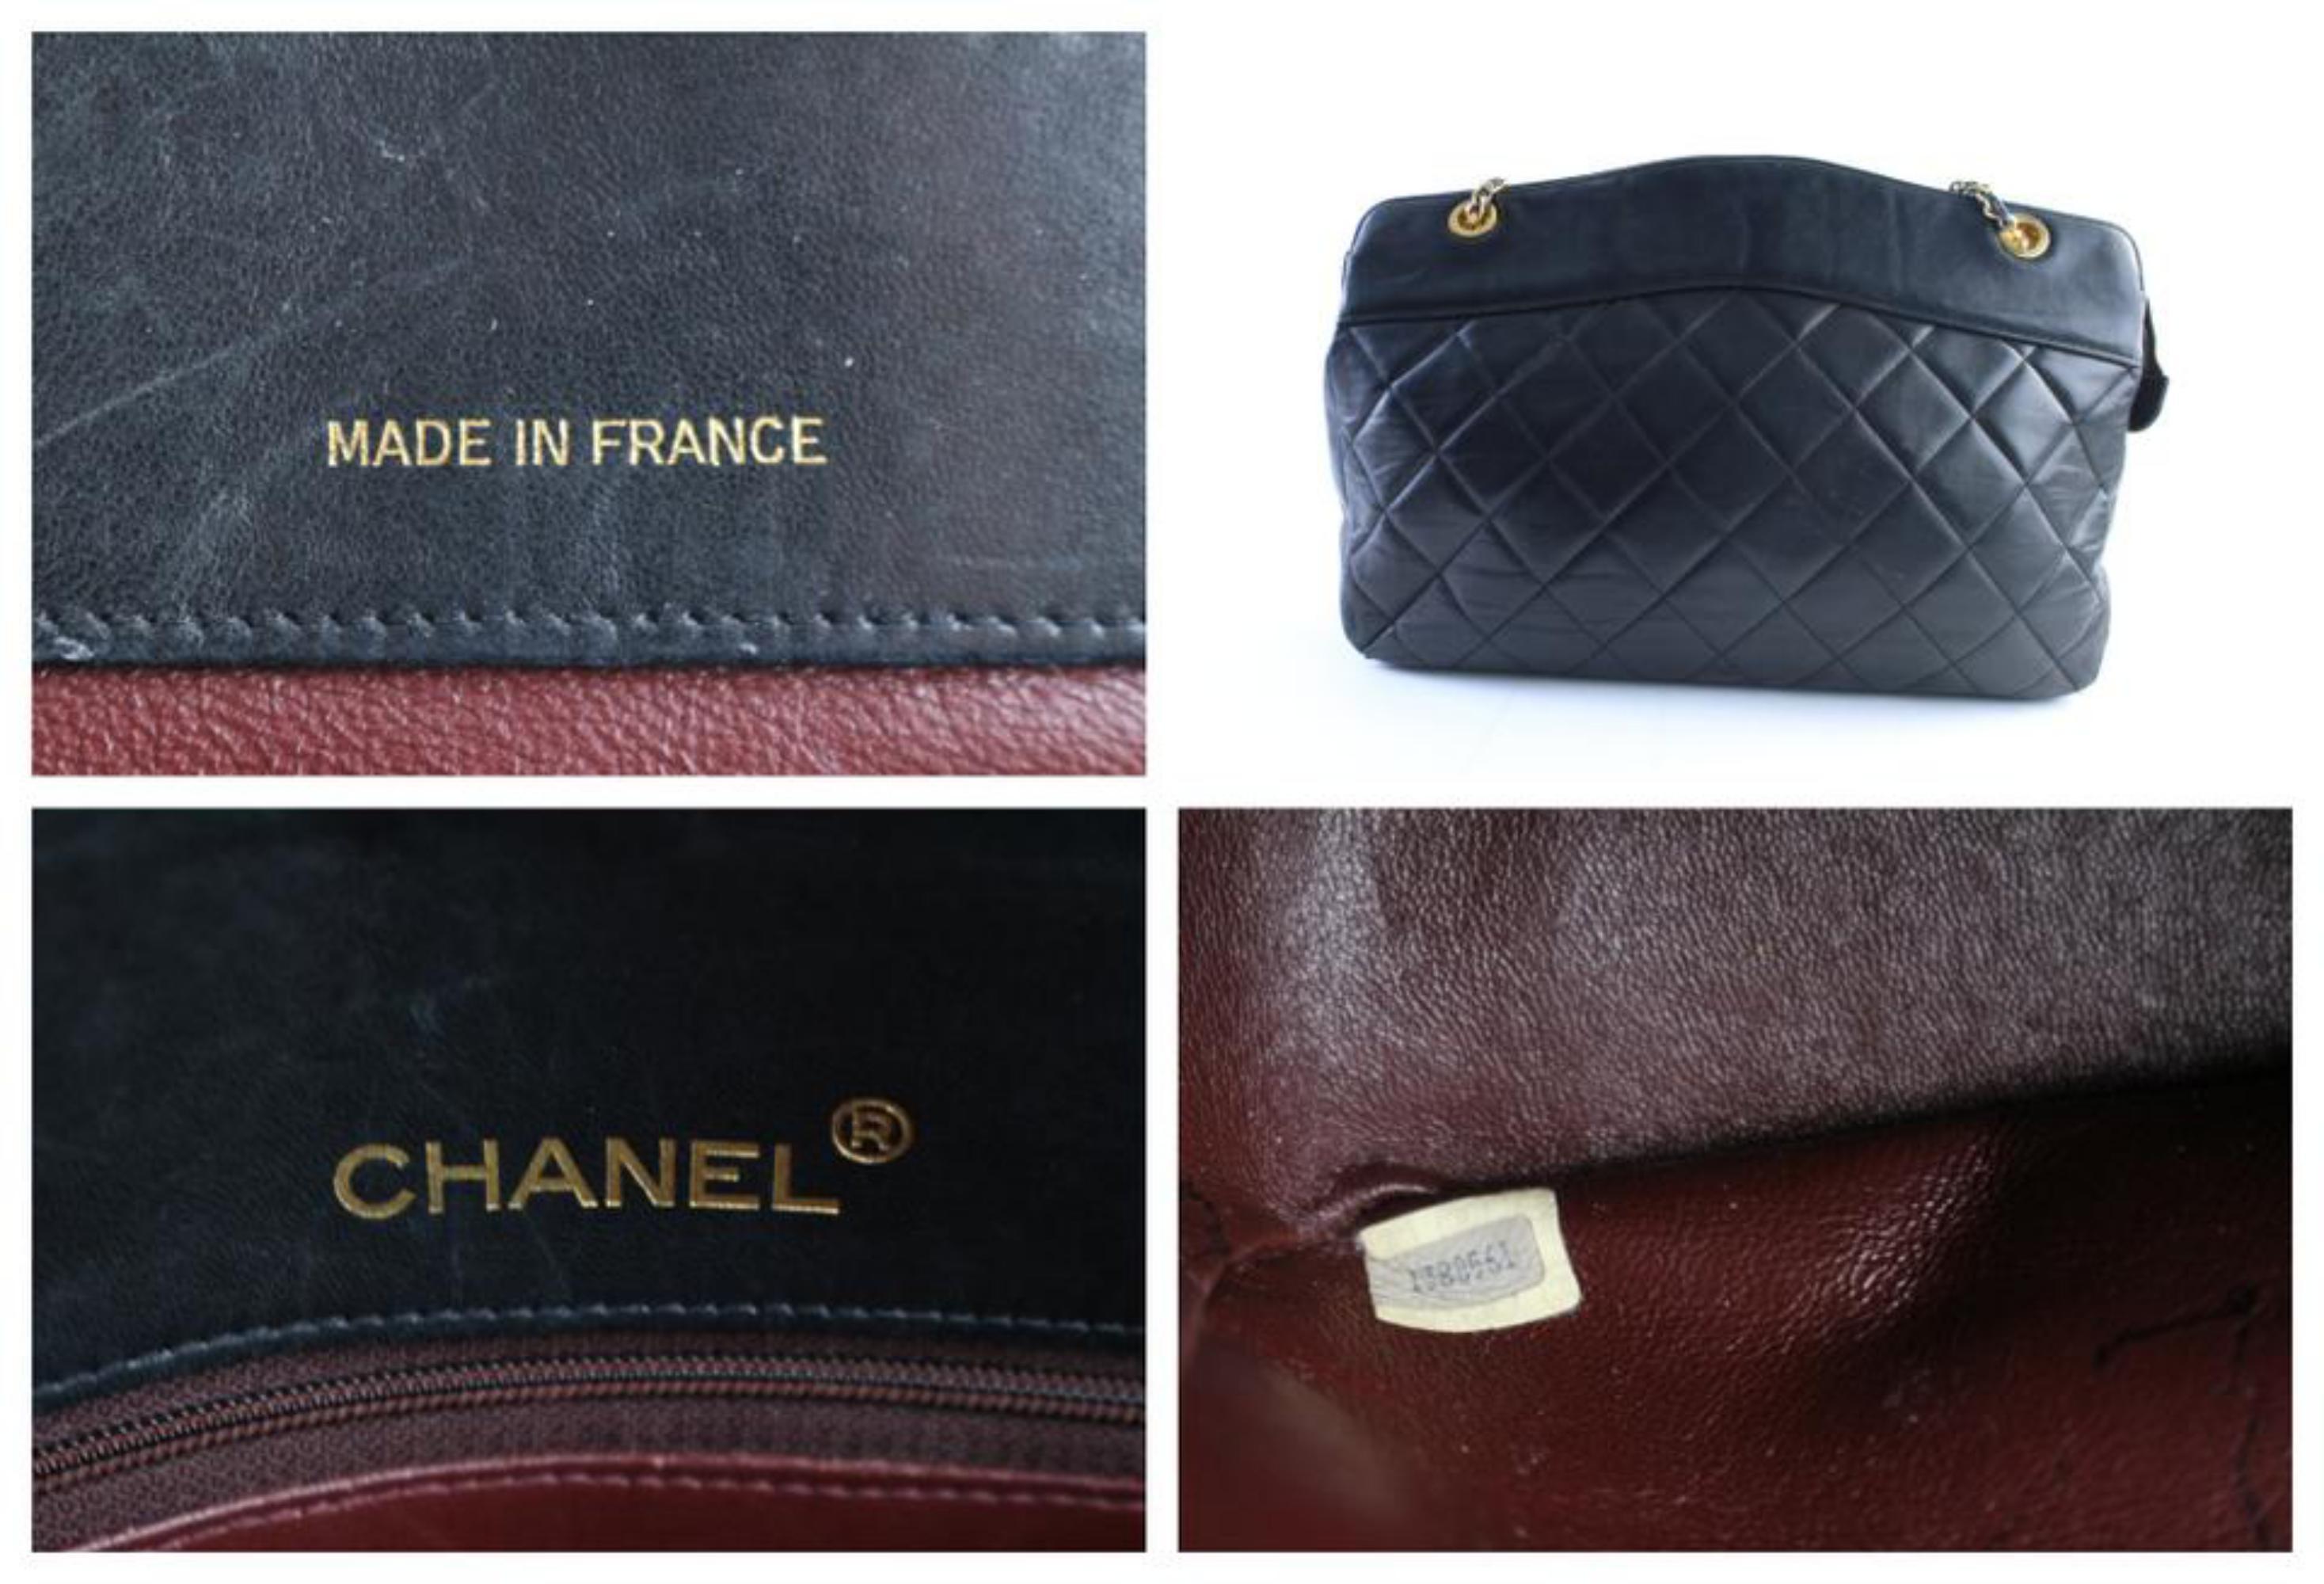 Chanel Medallion Chain Tote 14cr0515 Black Leather Shoulder Bag In Good Condition For Sale In Forest Hills, NY